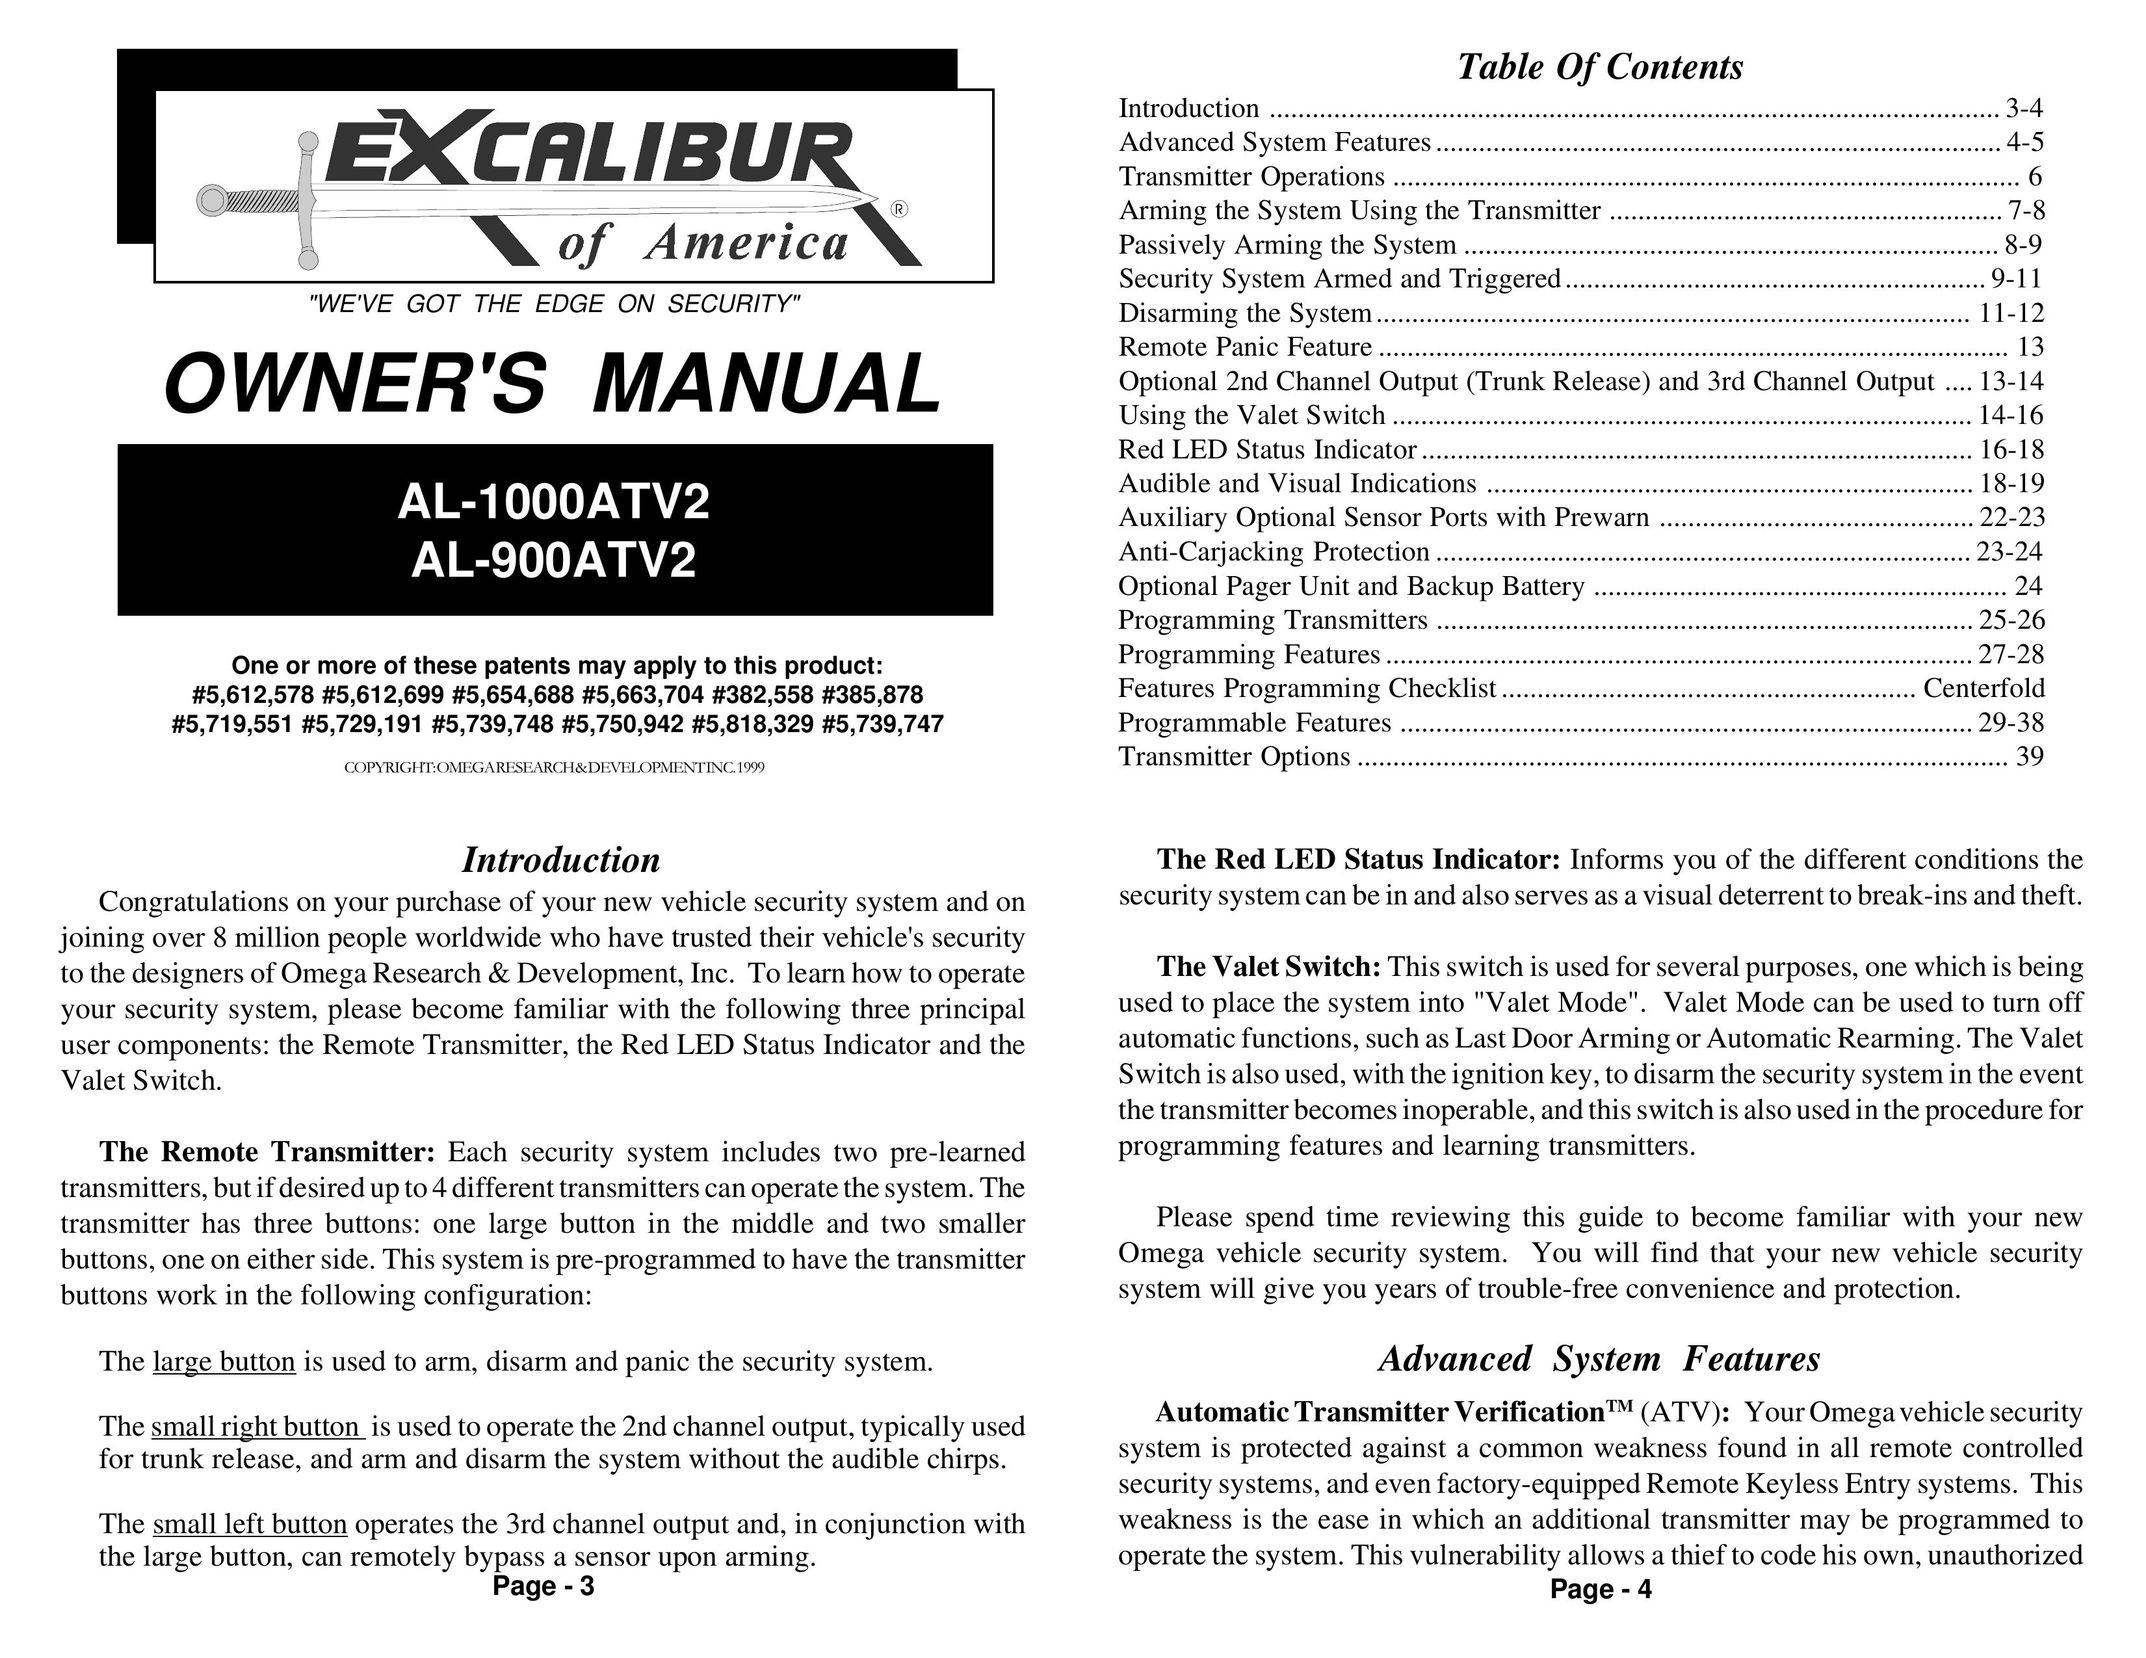 Excalibur electronic AL-900ATV2 Home Security System User Manual